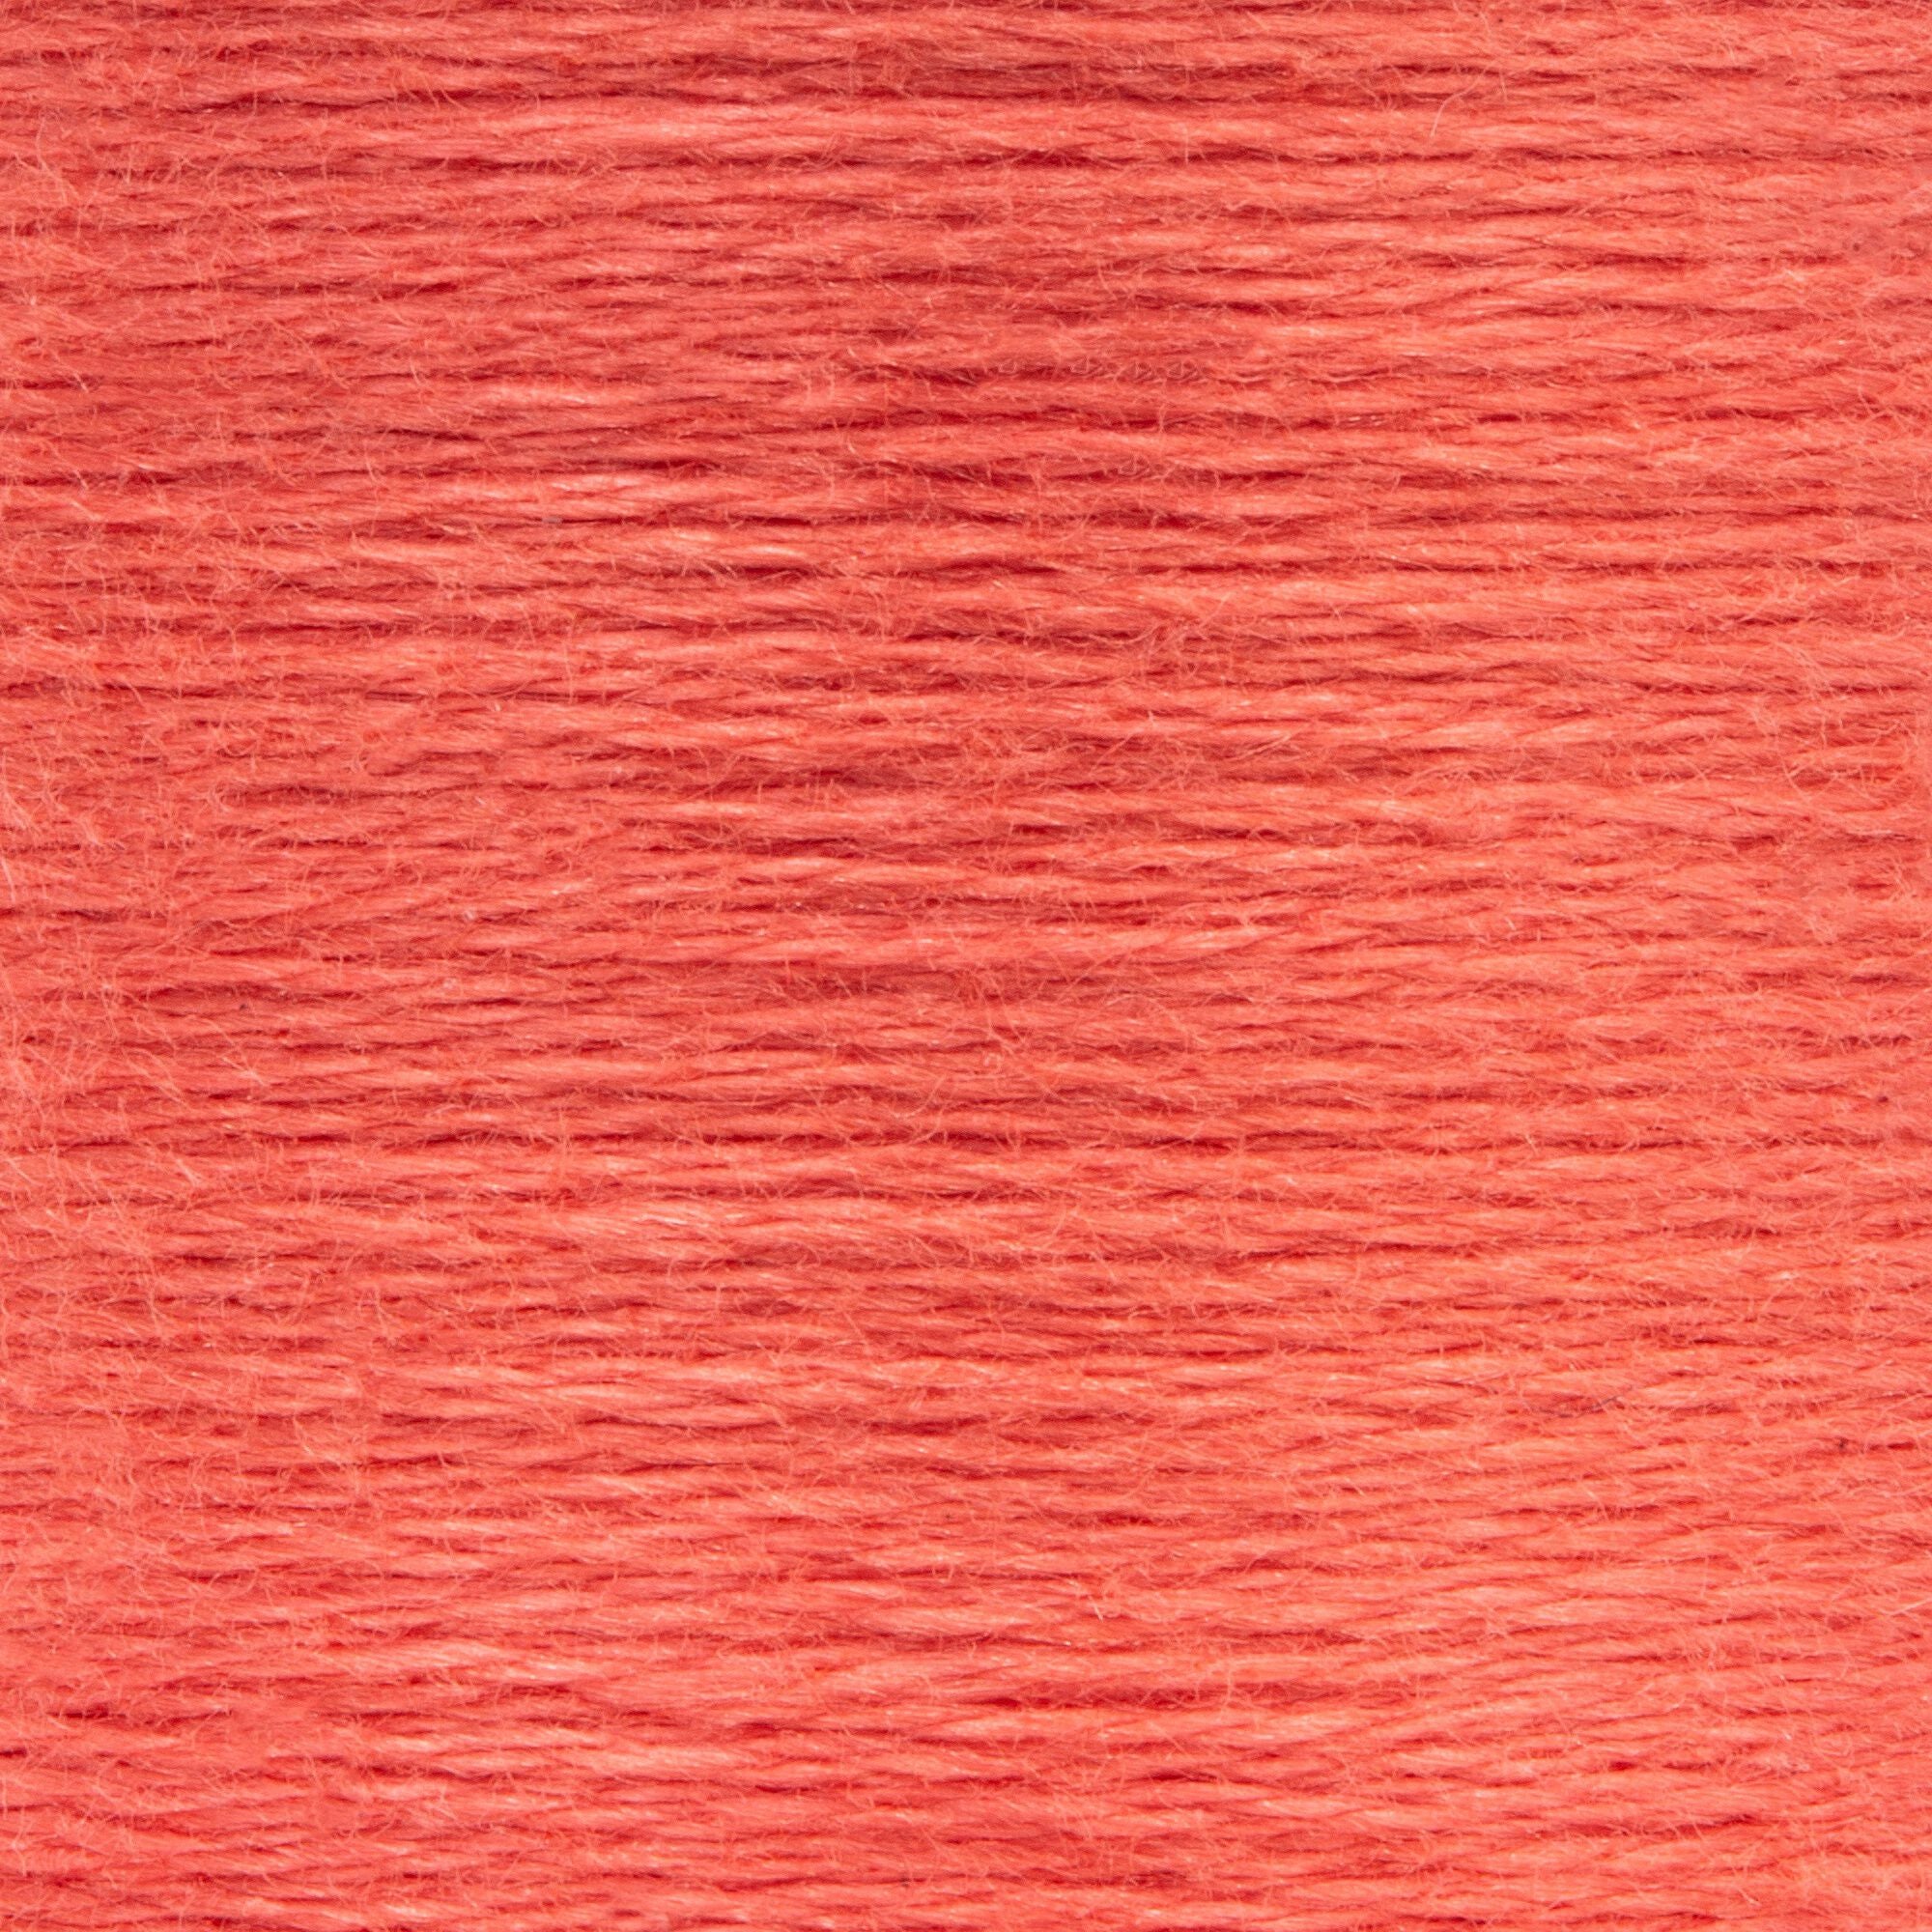 Anchor Embroidery Floss in Salmon Med